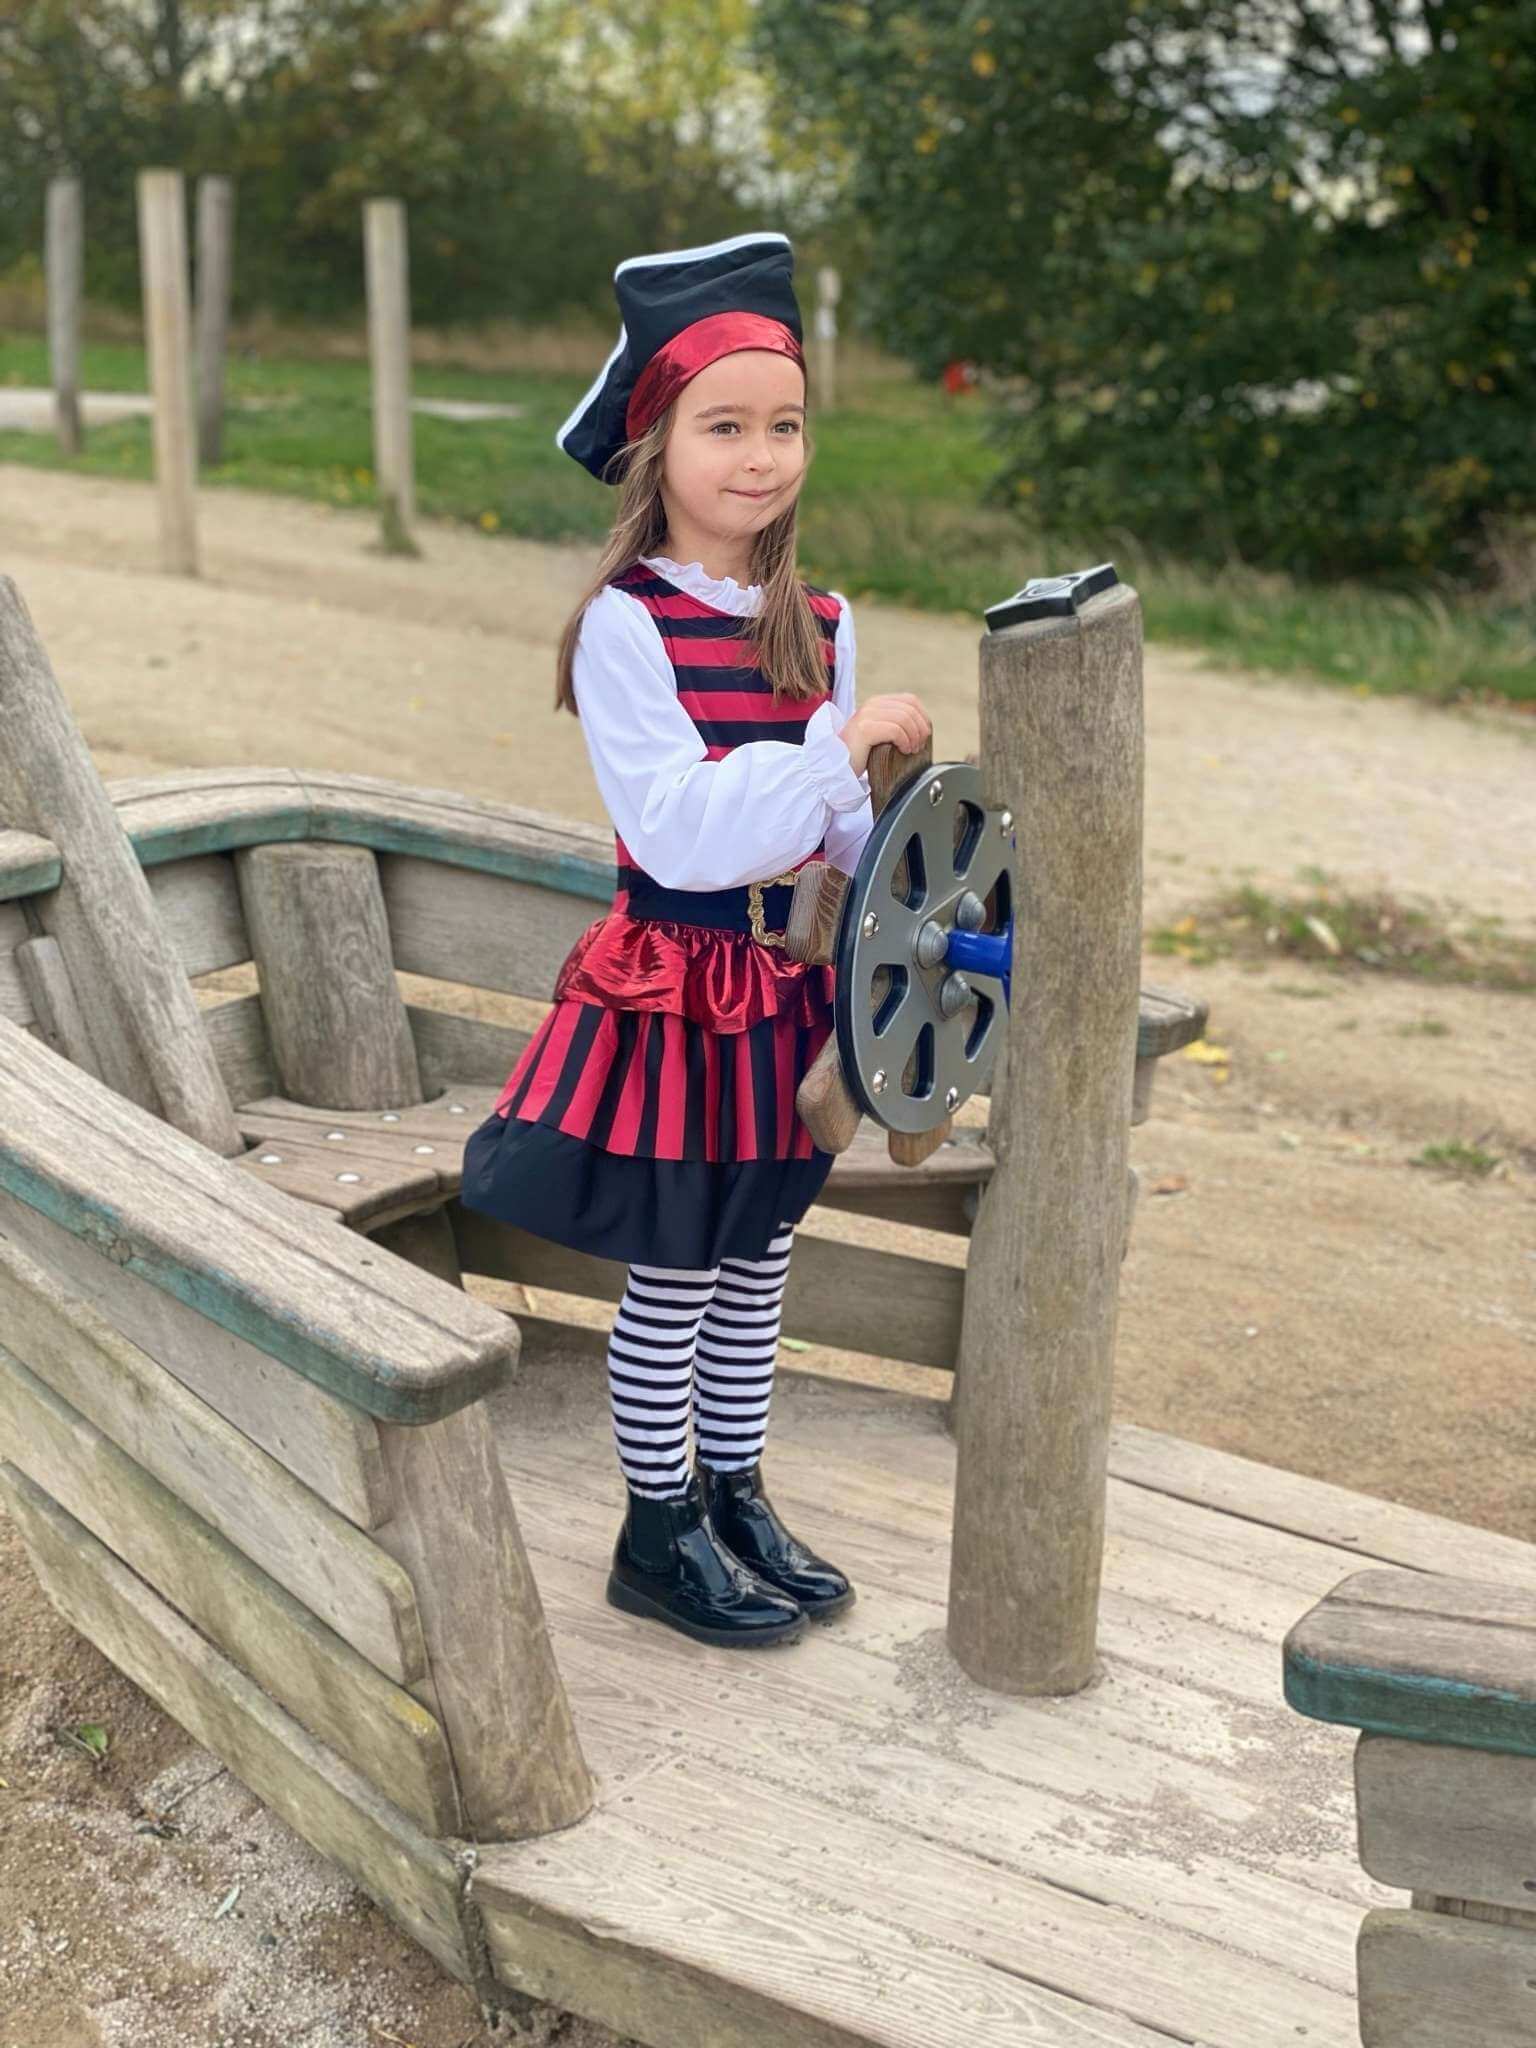 A girl stood on a wooden boat wearing the pirate costume.